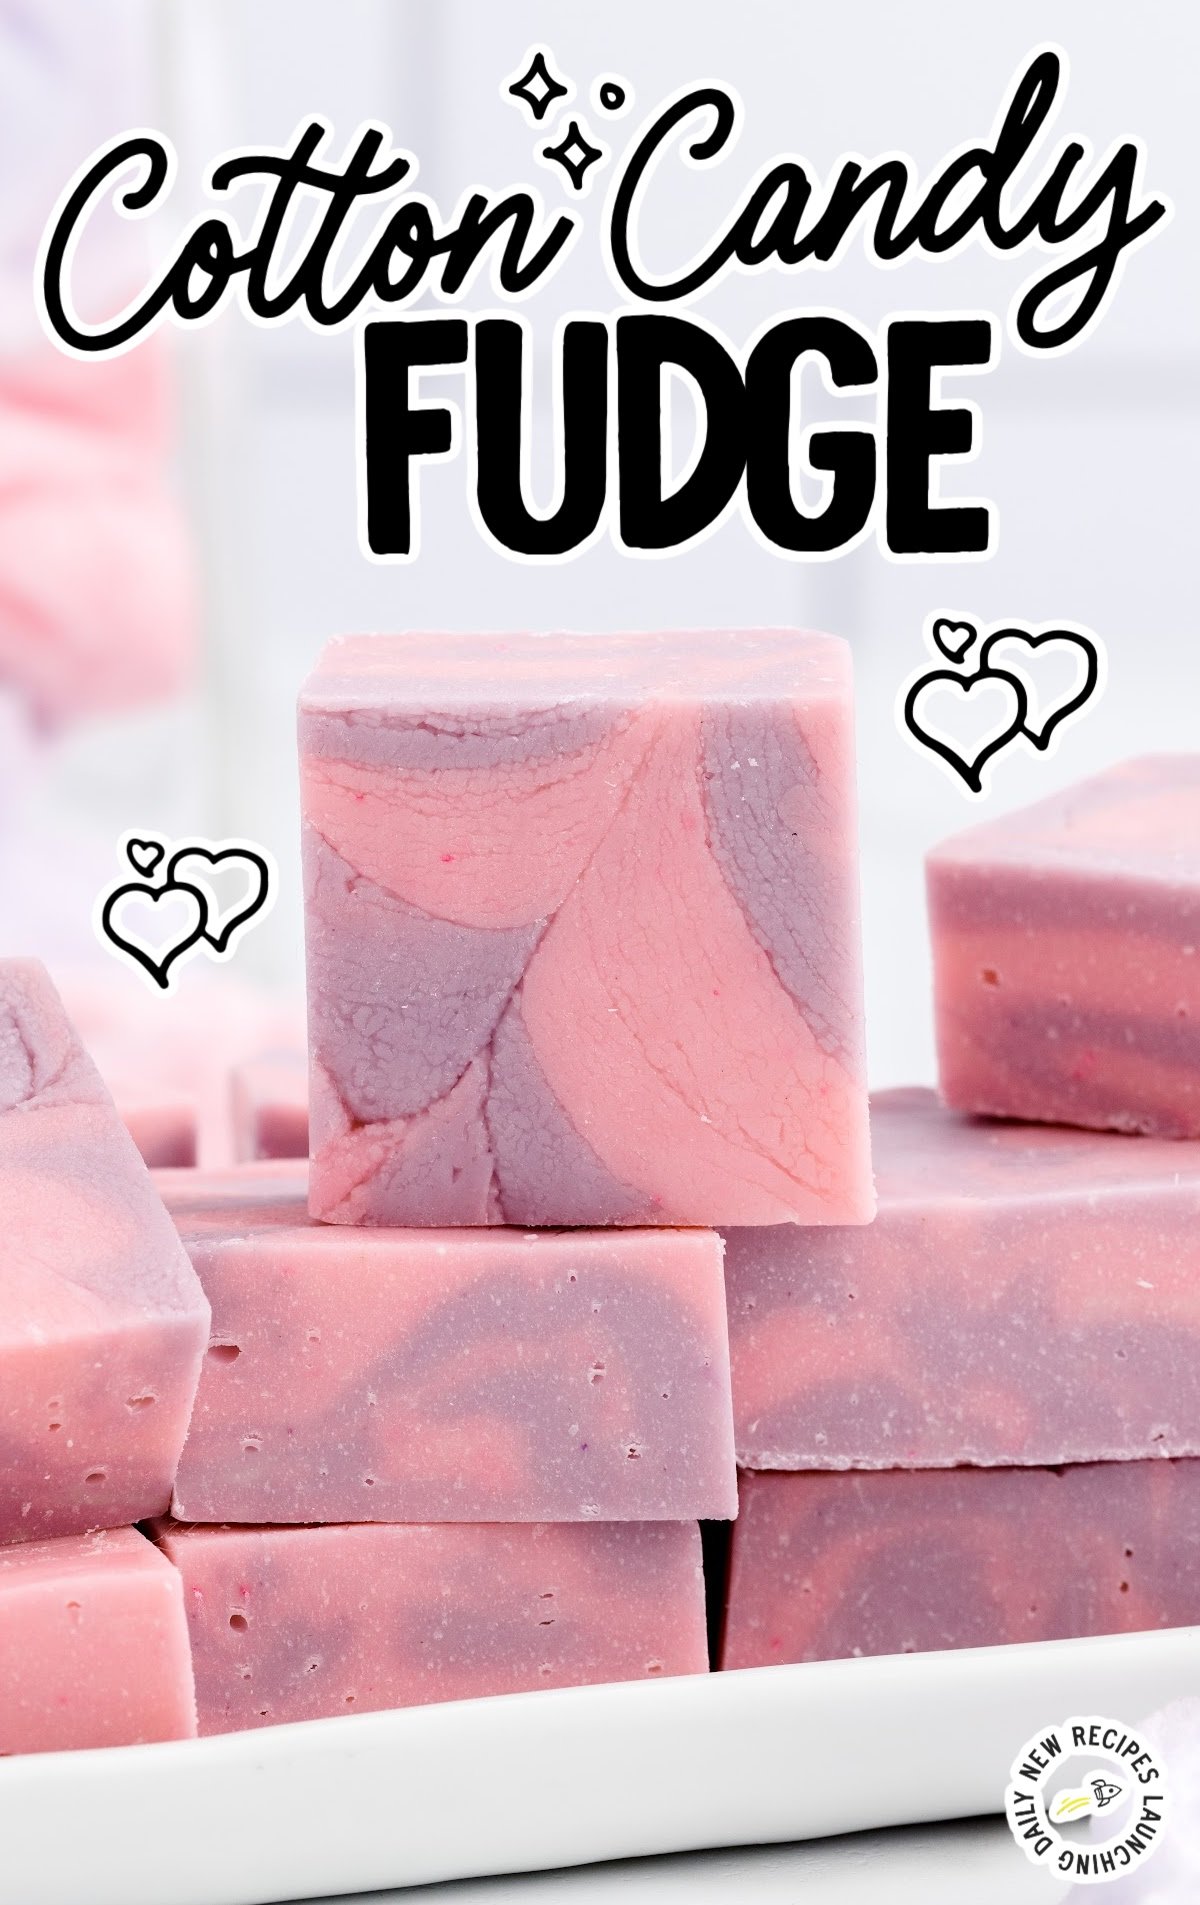 close up shot of stacks of Cotton Candy Fudge